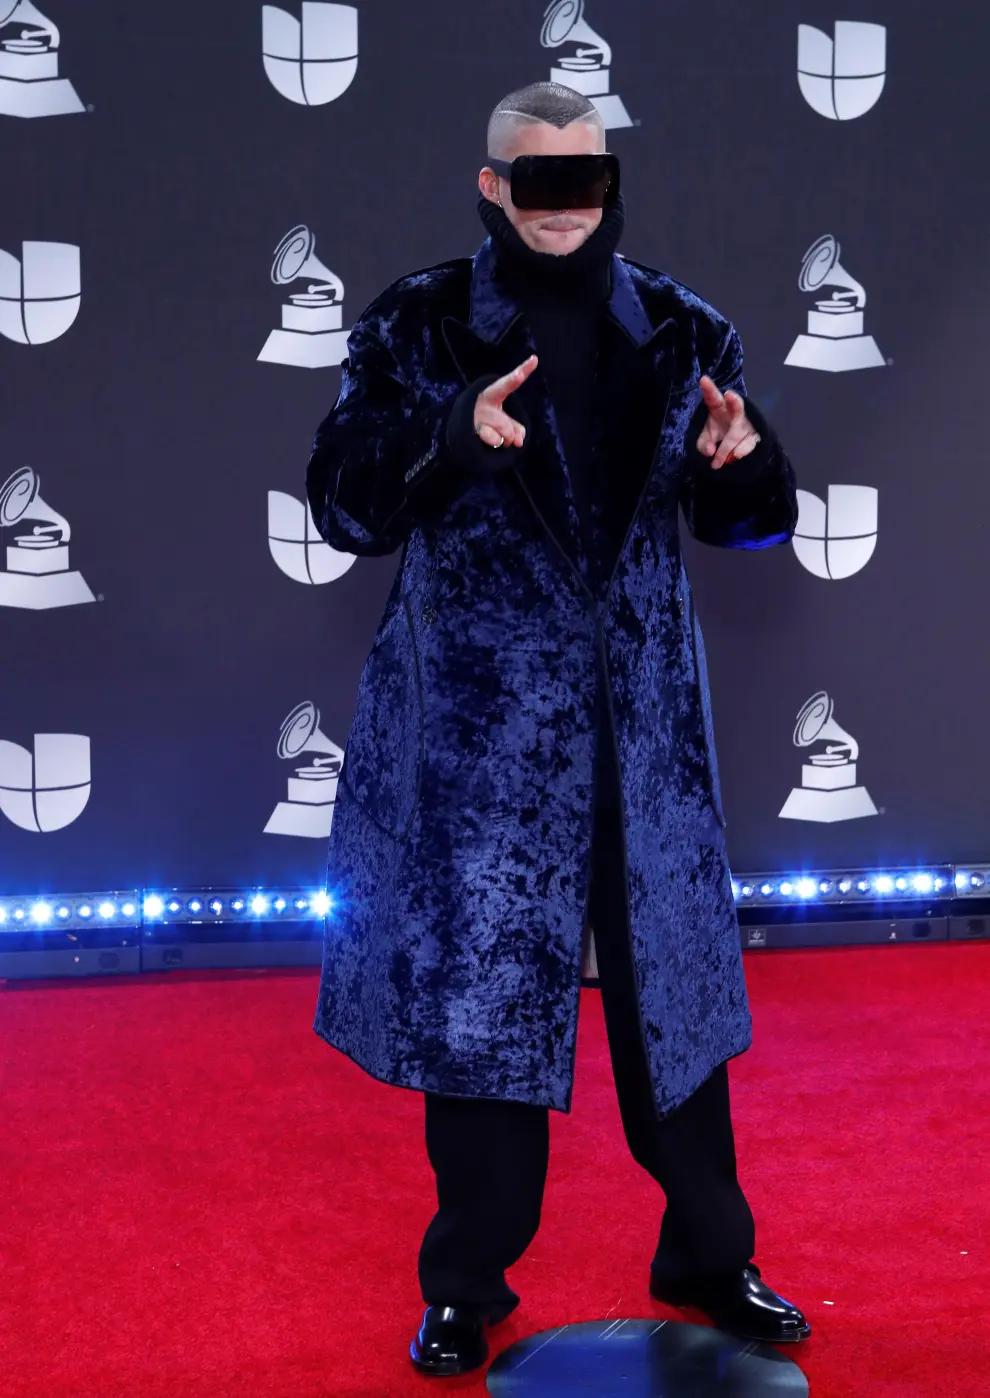 Las Vegas (United States), 15/11/2019.- Alessia Cara arrives for the 20th annual Latin Grammy Awards ceremony at the MGM Grand Garden Arena in Las Vegas, Nevada, USA, 14 November 2019. The Latin Grammys recognize artistic and/or technical achievement, not sales figures or chart positions, and the winners are determined by the votes of their peers - the qualified voting members of the Latin Recording Academy. (Estados Unidos) EFE/EPA/NINA PROMMER Arrivals - 20th Latin Grammy Awards